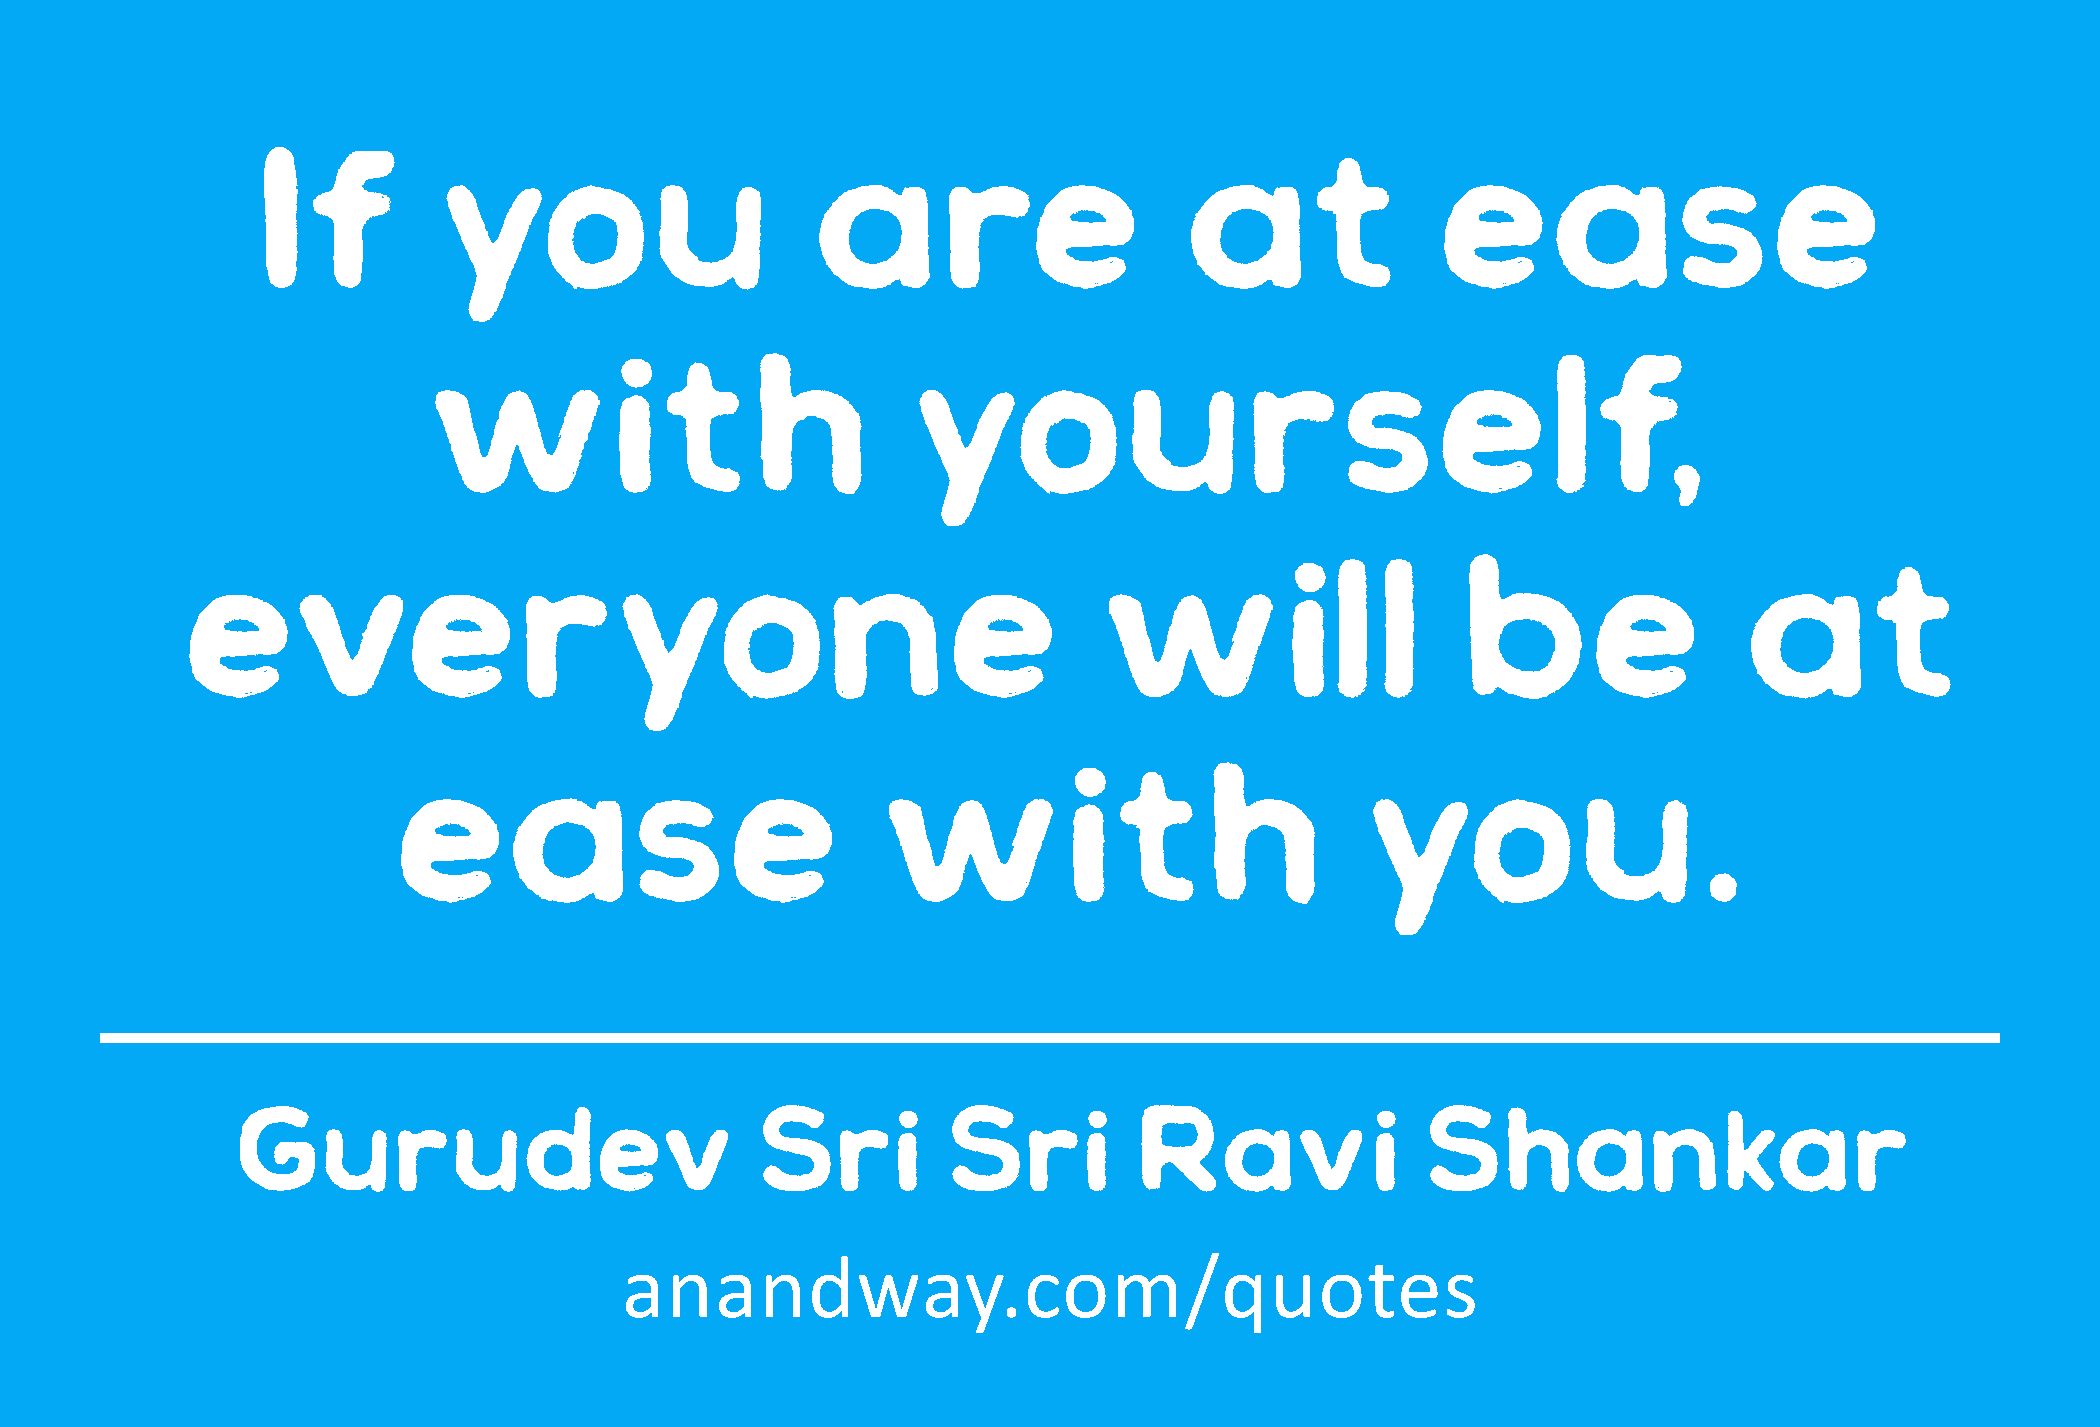 If you are at ease with yourself, everyone will be at ease with you. 
 -Gurudev Sri Sri Ravi Shankar